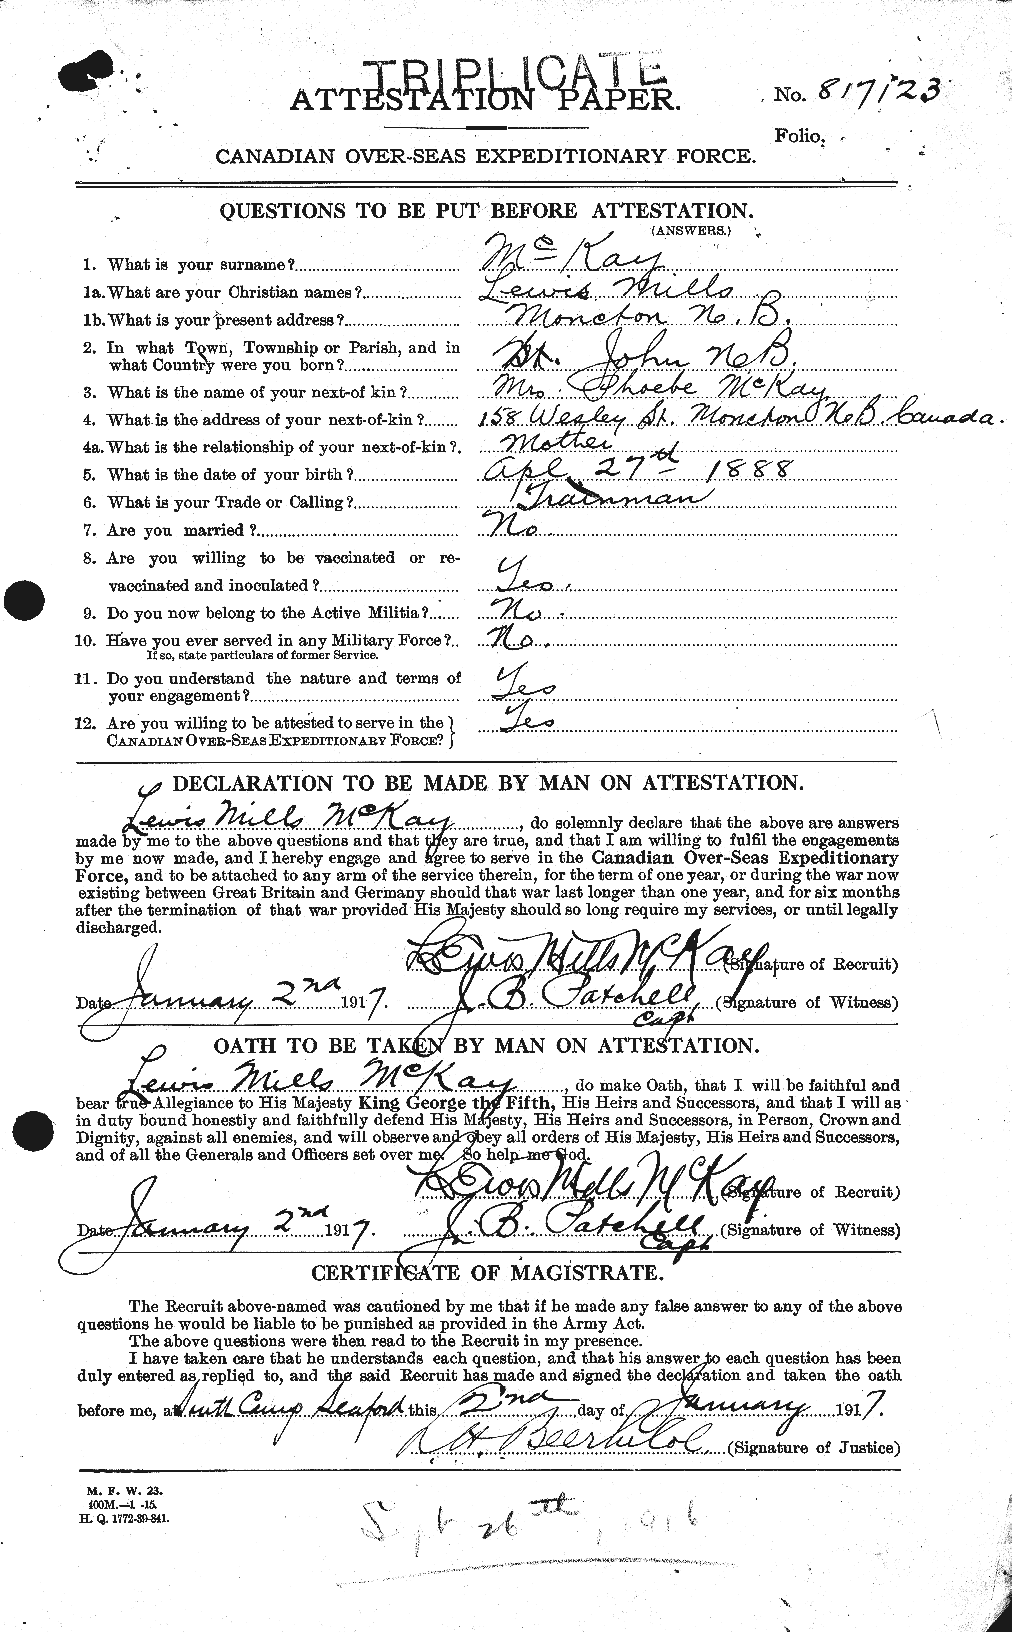 Personnel Records of the First World War - CEF 527152a